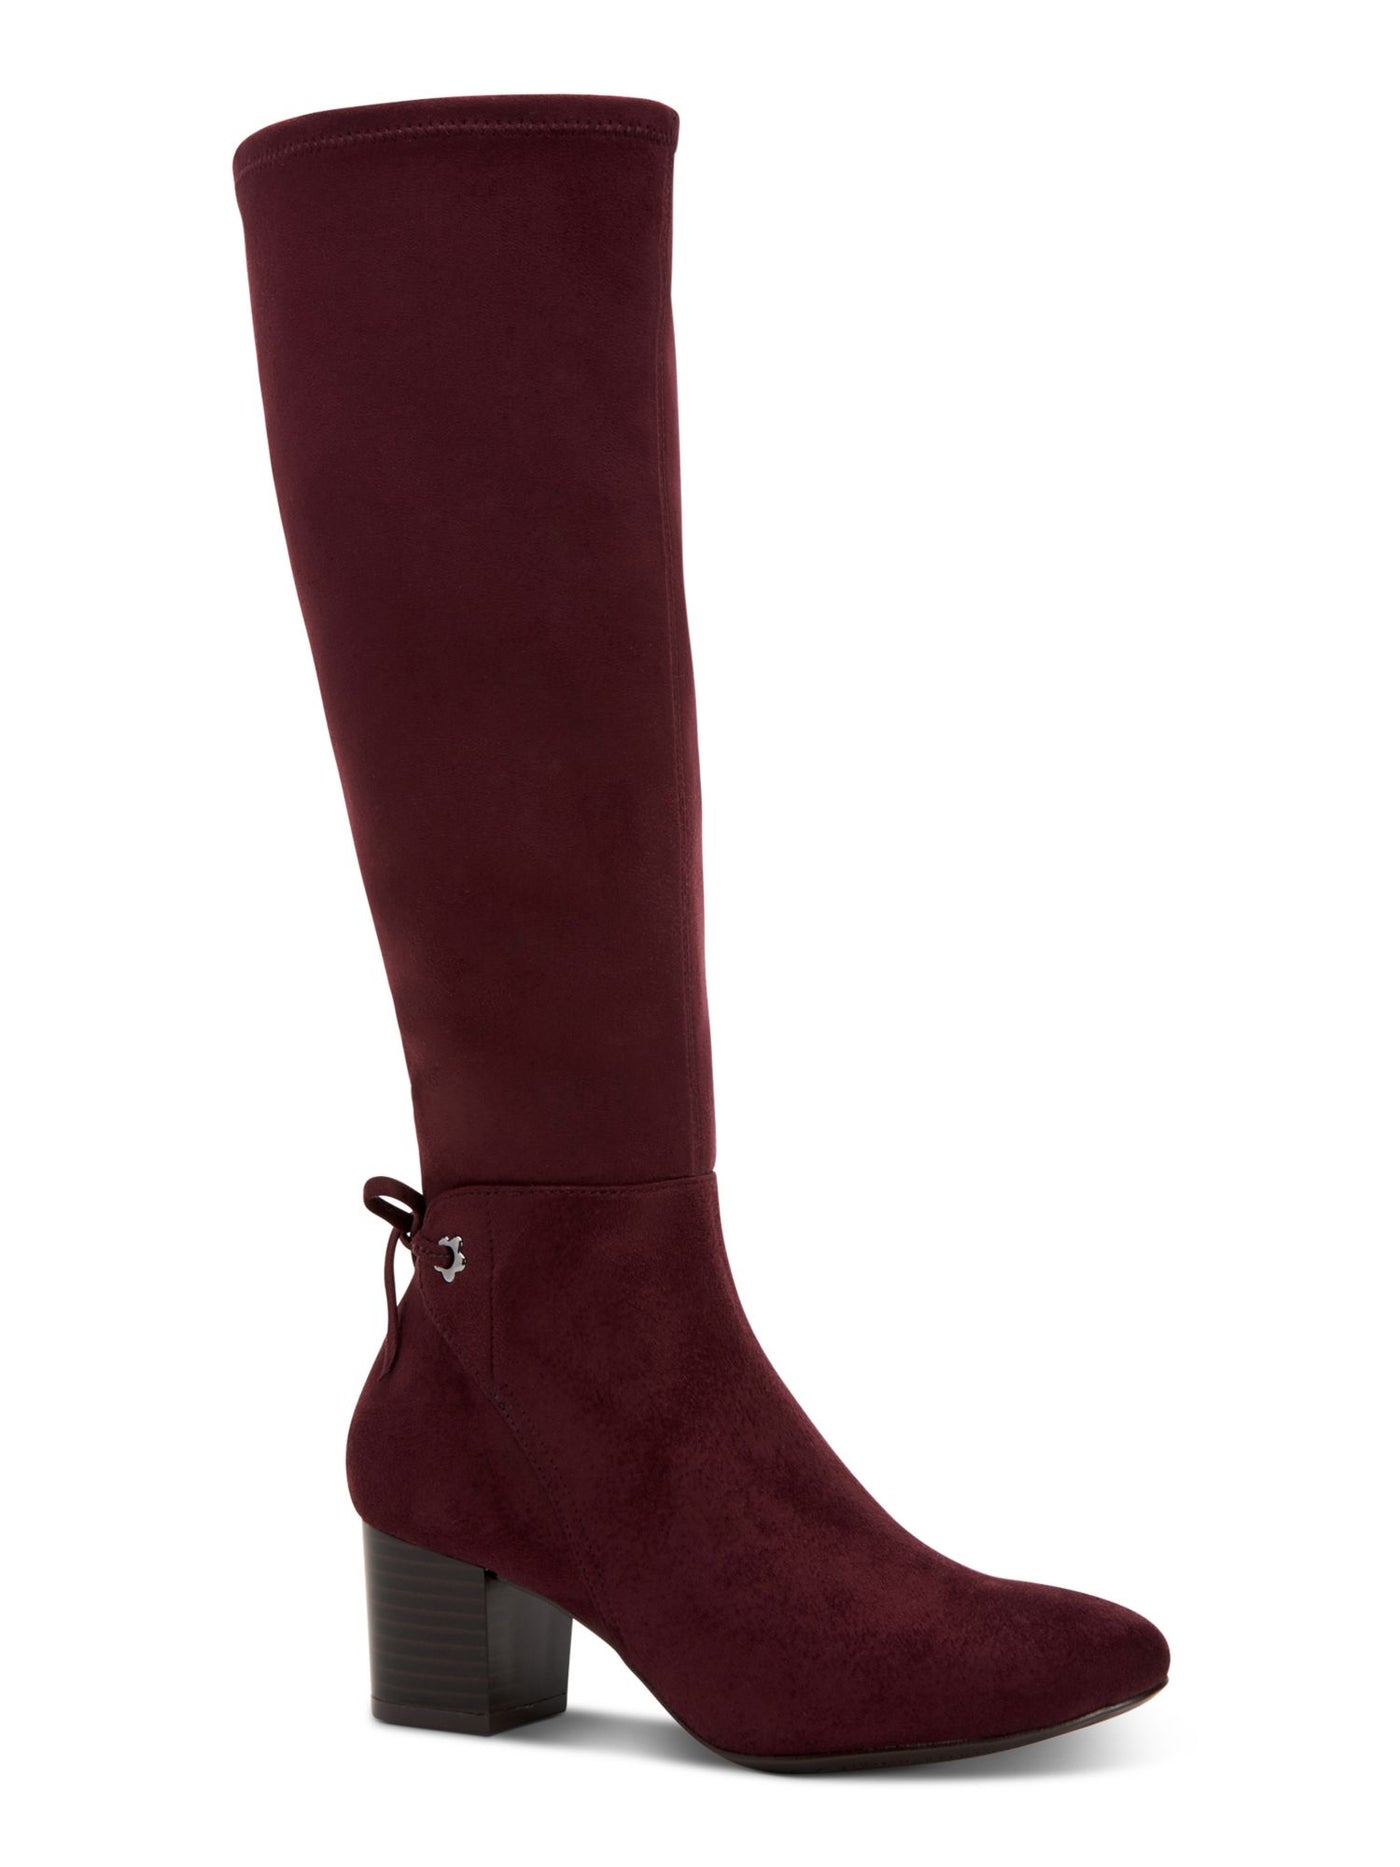 CHARTER CLUB Womens Chocolate Burgundy Flower Grommets Wide Calf Padded Jaccque Almond Toe Block Heel Zip-Up Boots Shoes 8.5 M WC